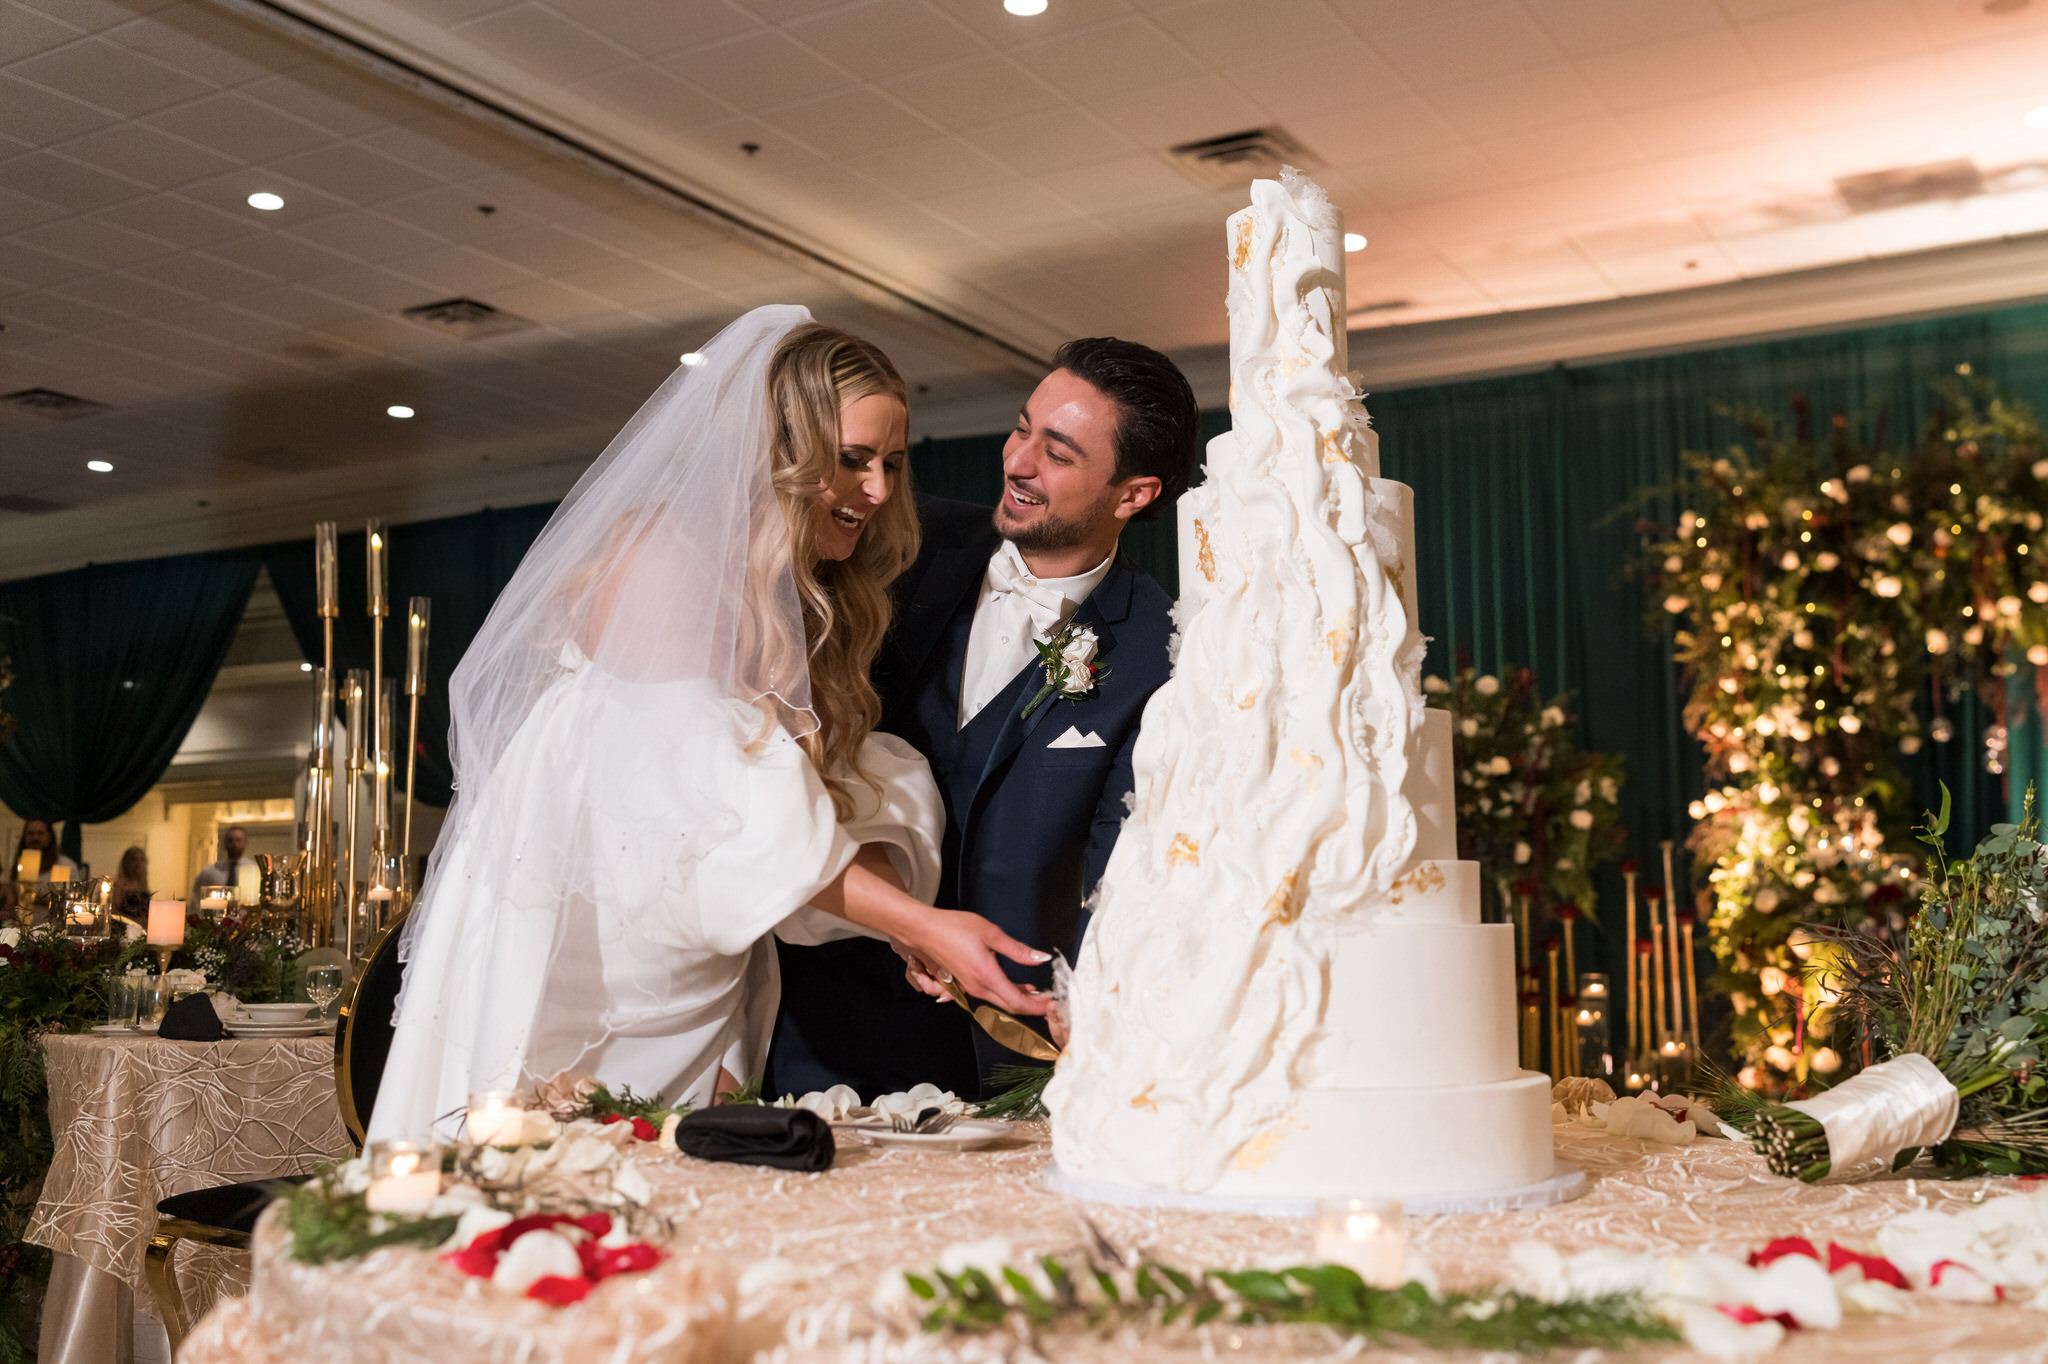 Bride and groom cut their cake at their Penna's of Sterling wedding reception